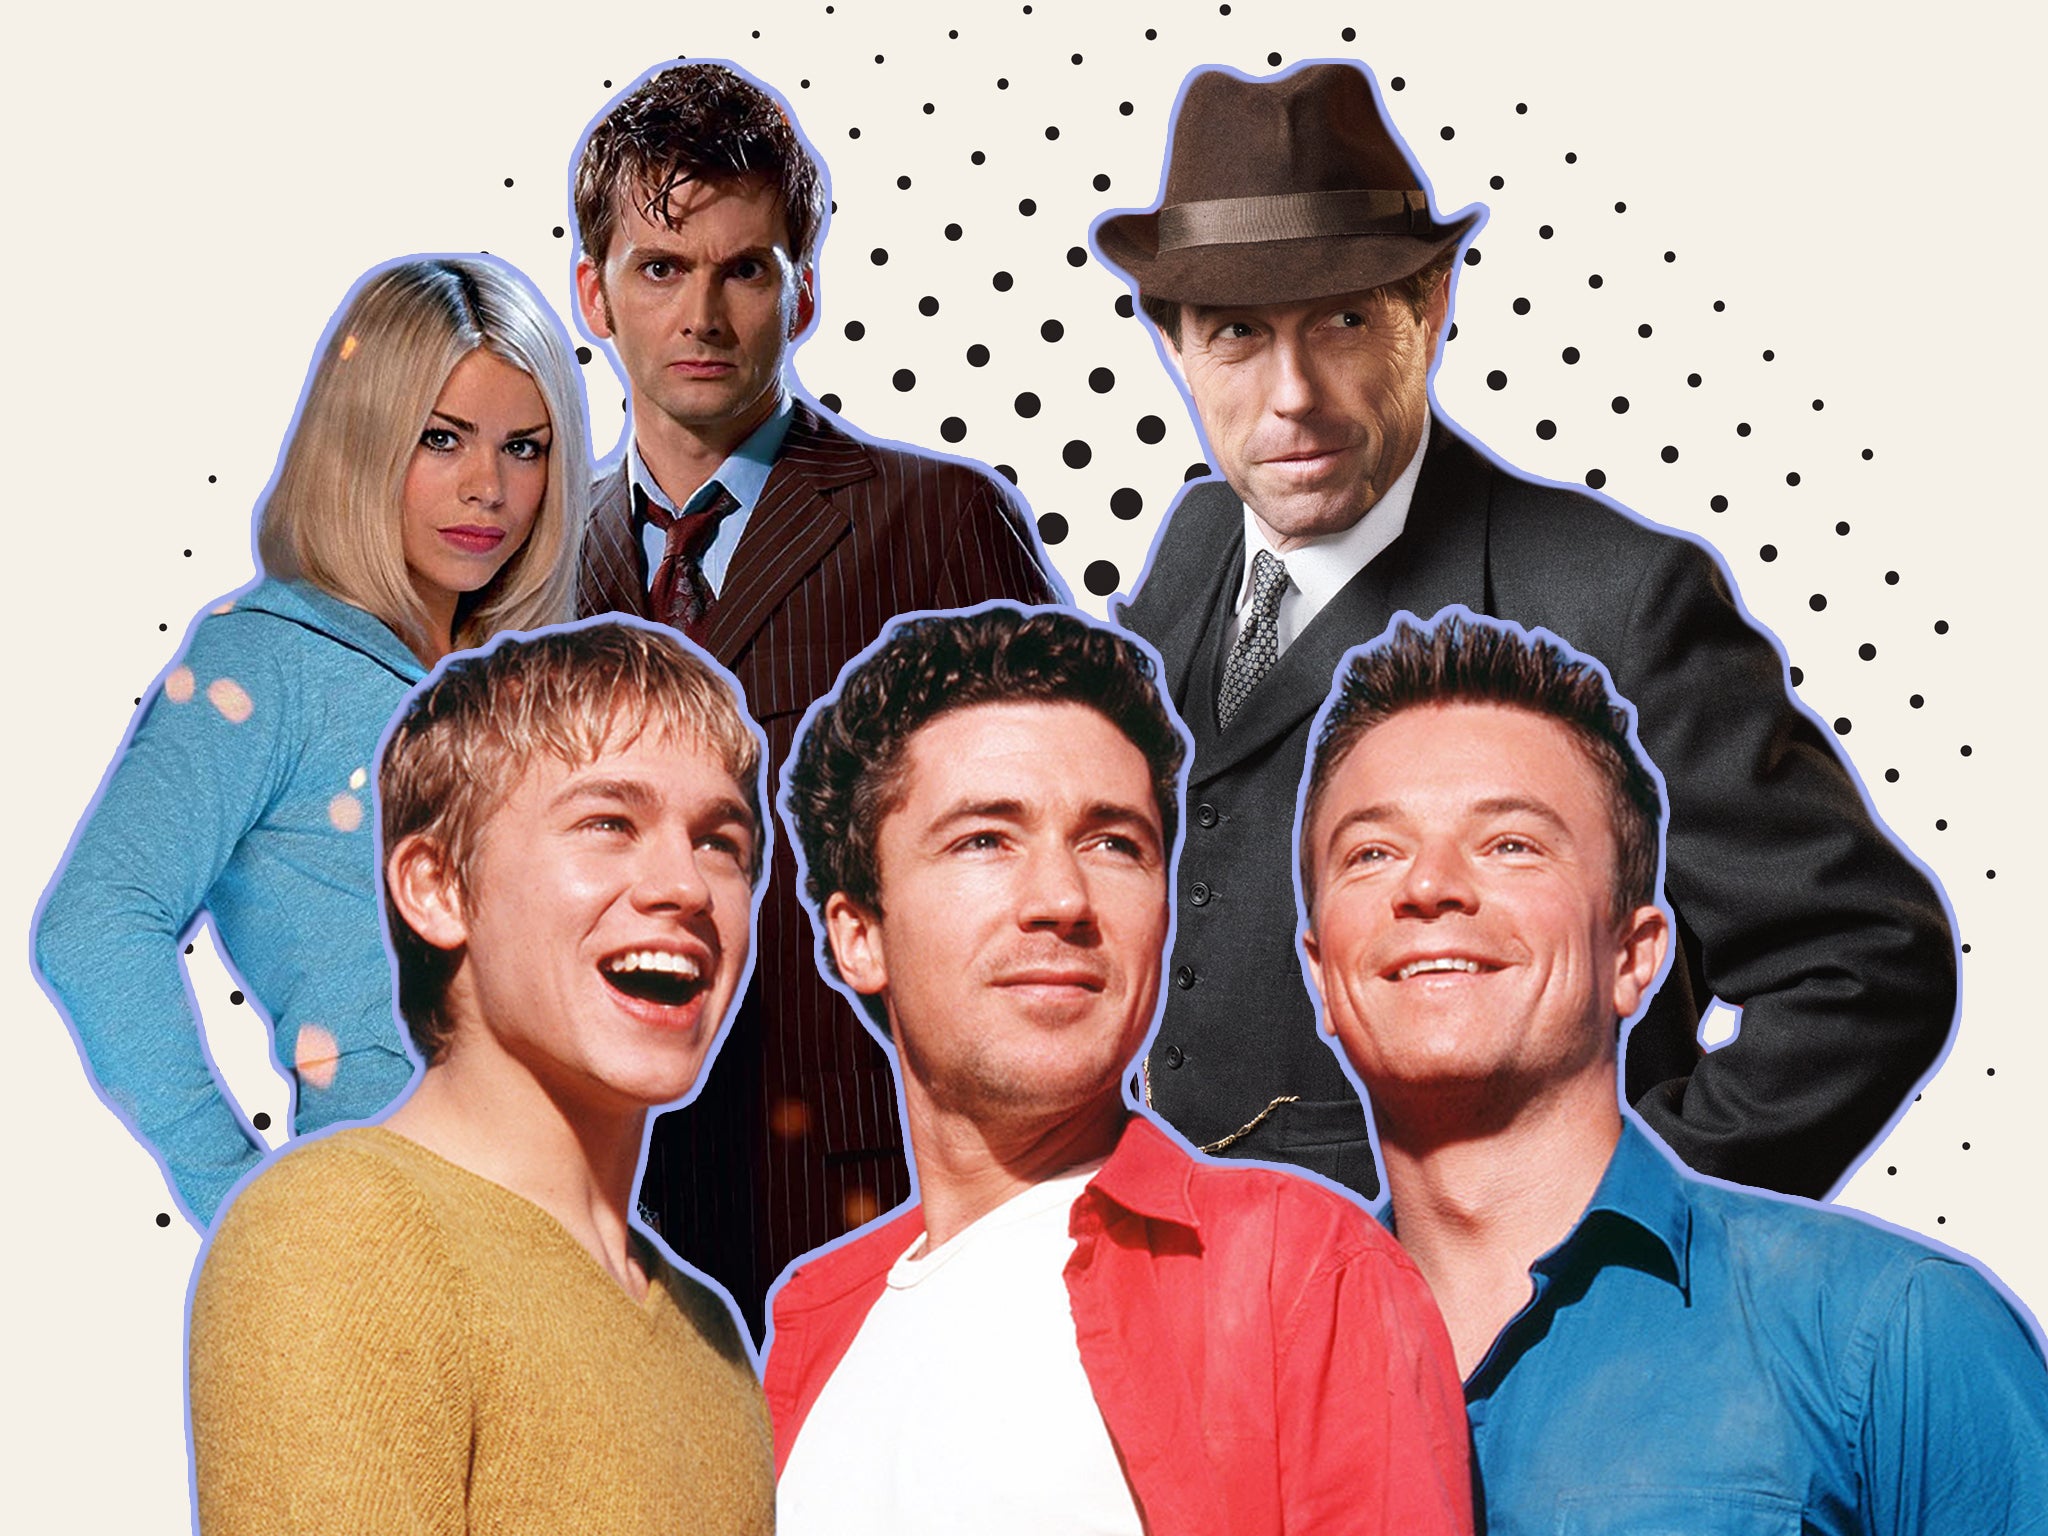 Russell T Davies's 10 best TV shows ranked, from It's a Sin to